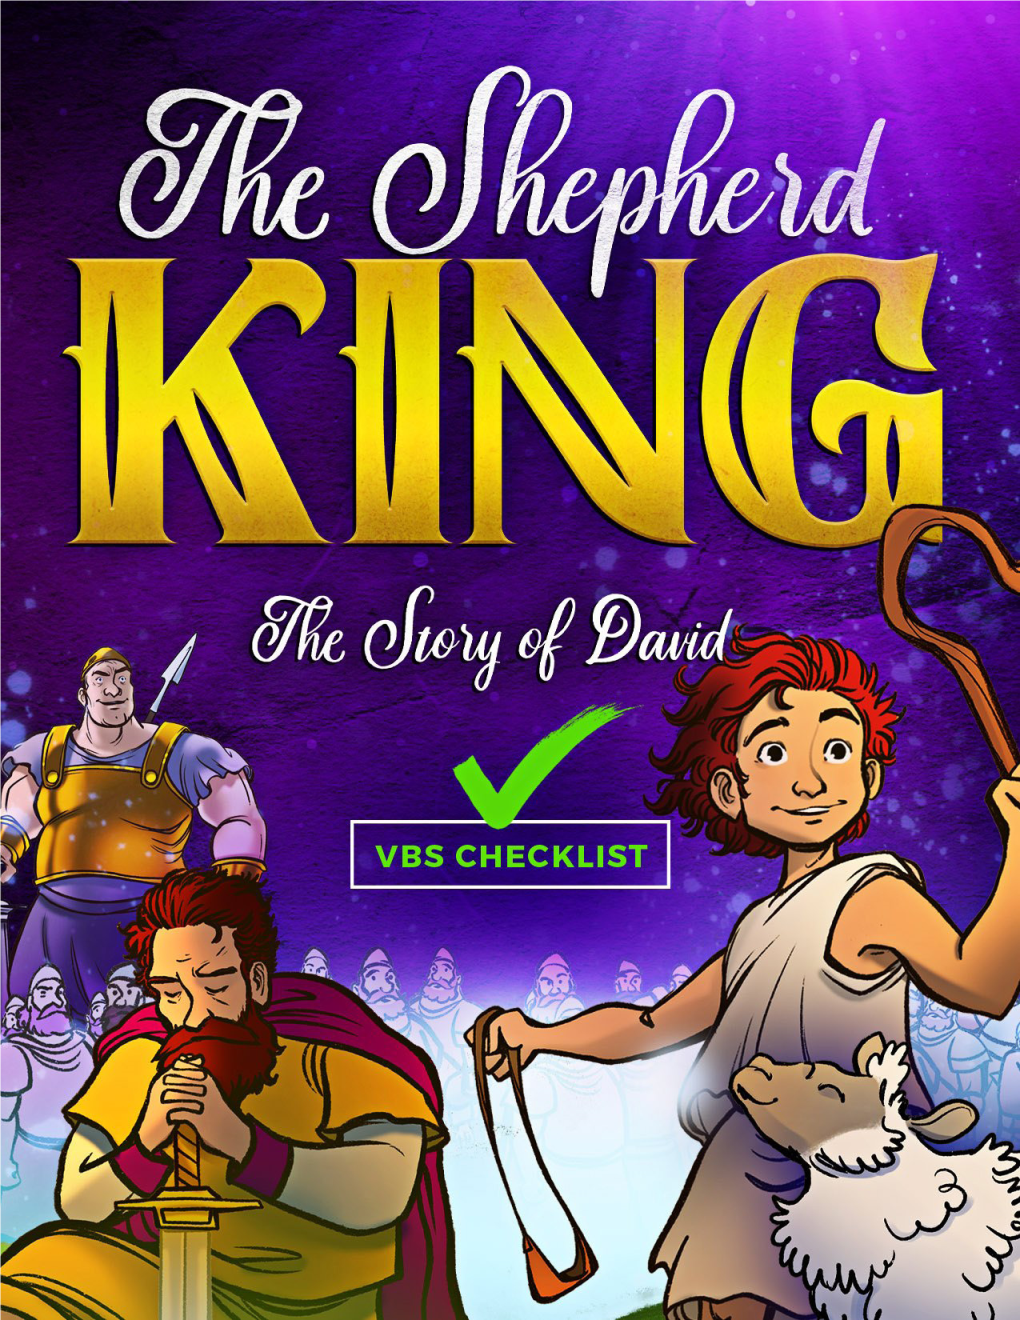 The Shepherd King Is an Epic 5-Day Vacation Bible School Adventure in Which Your Kids Will Learn About the Exciting Journey of David, from Shepherd to King